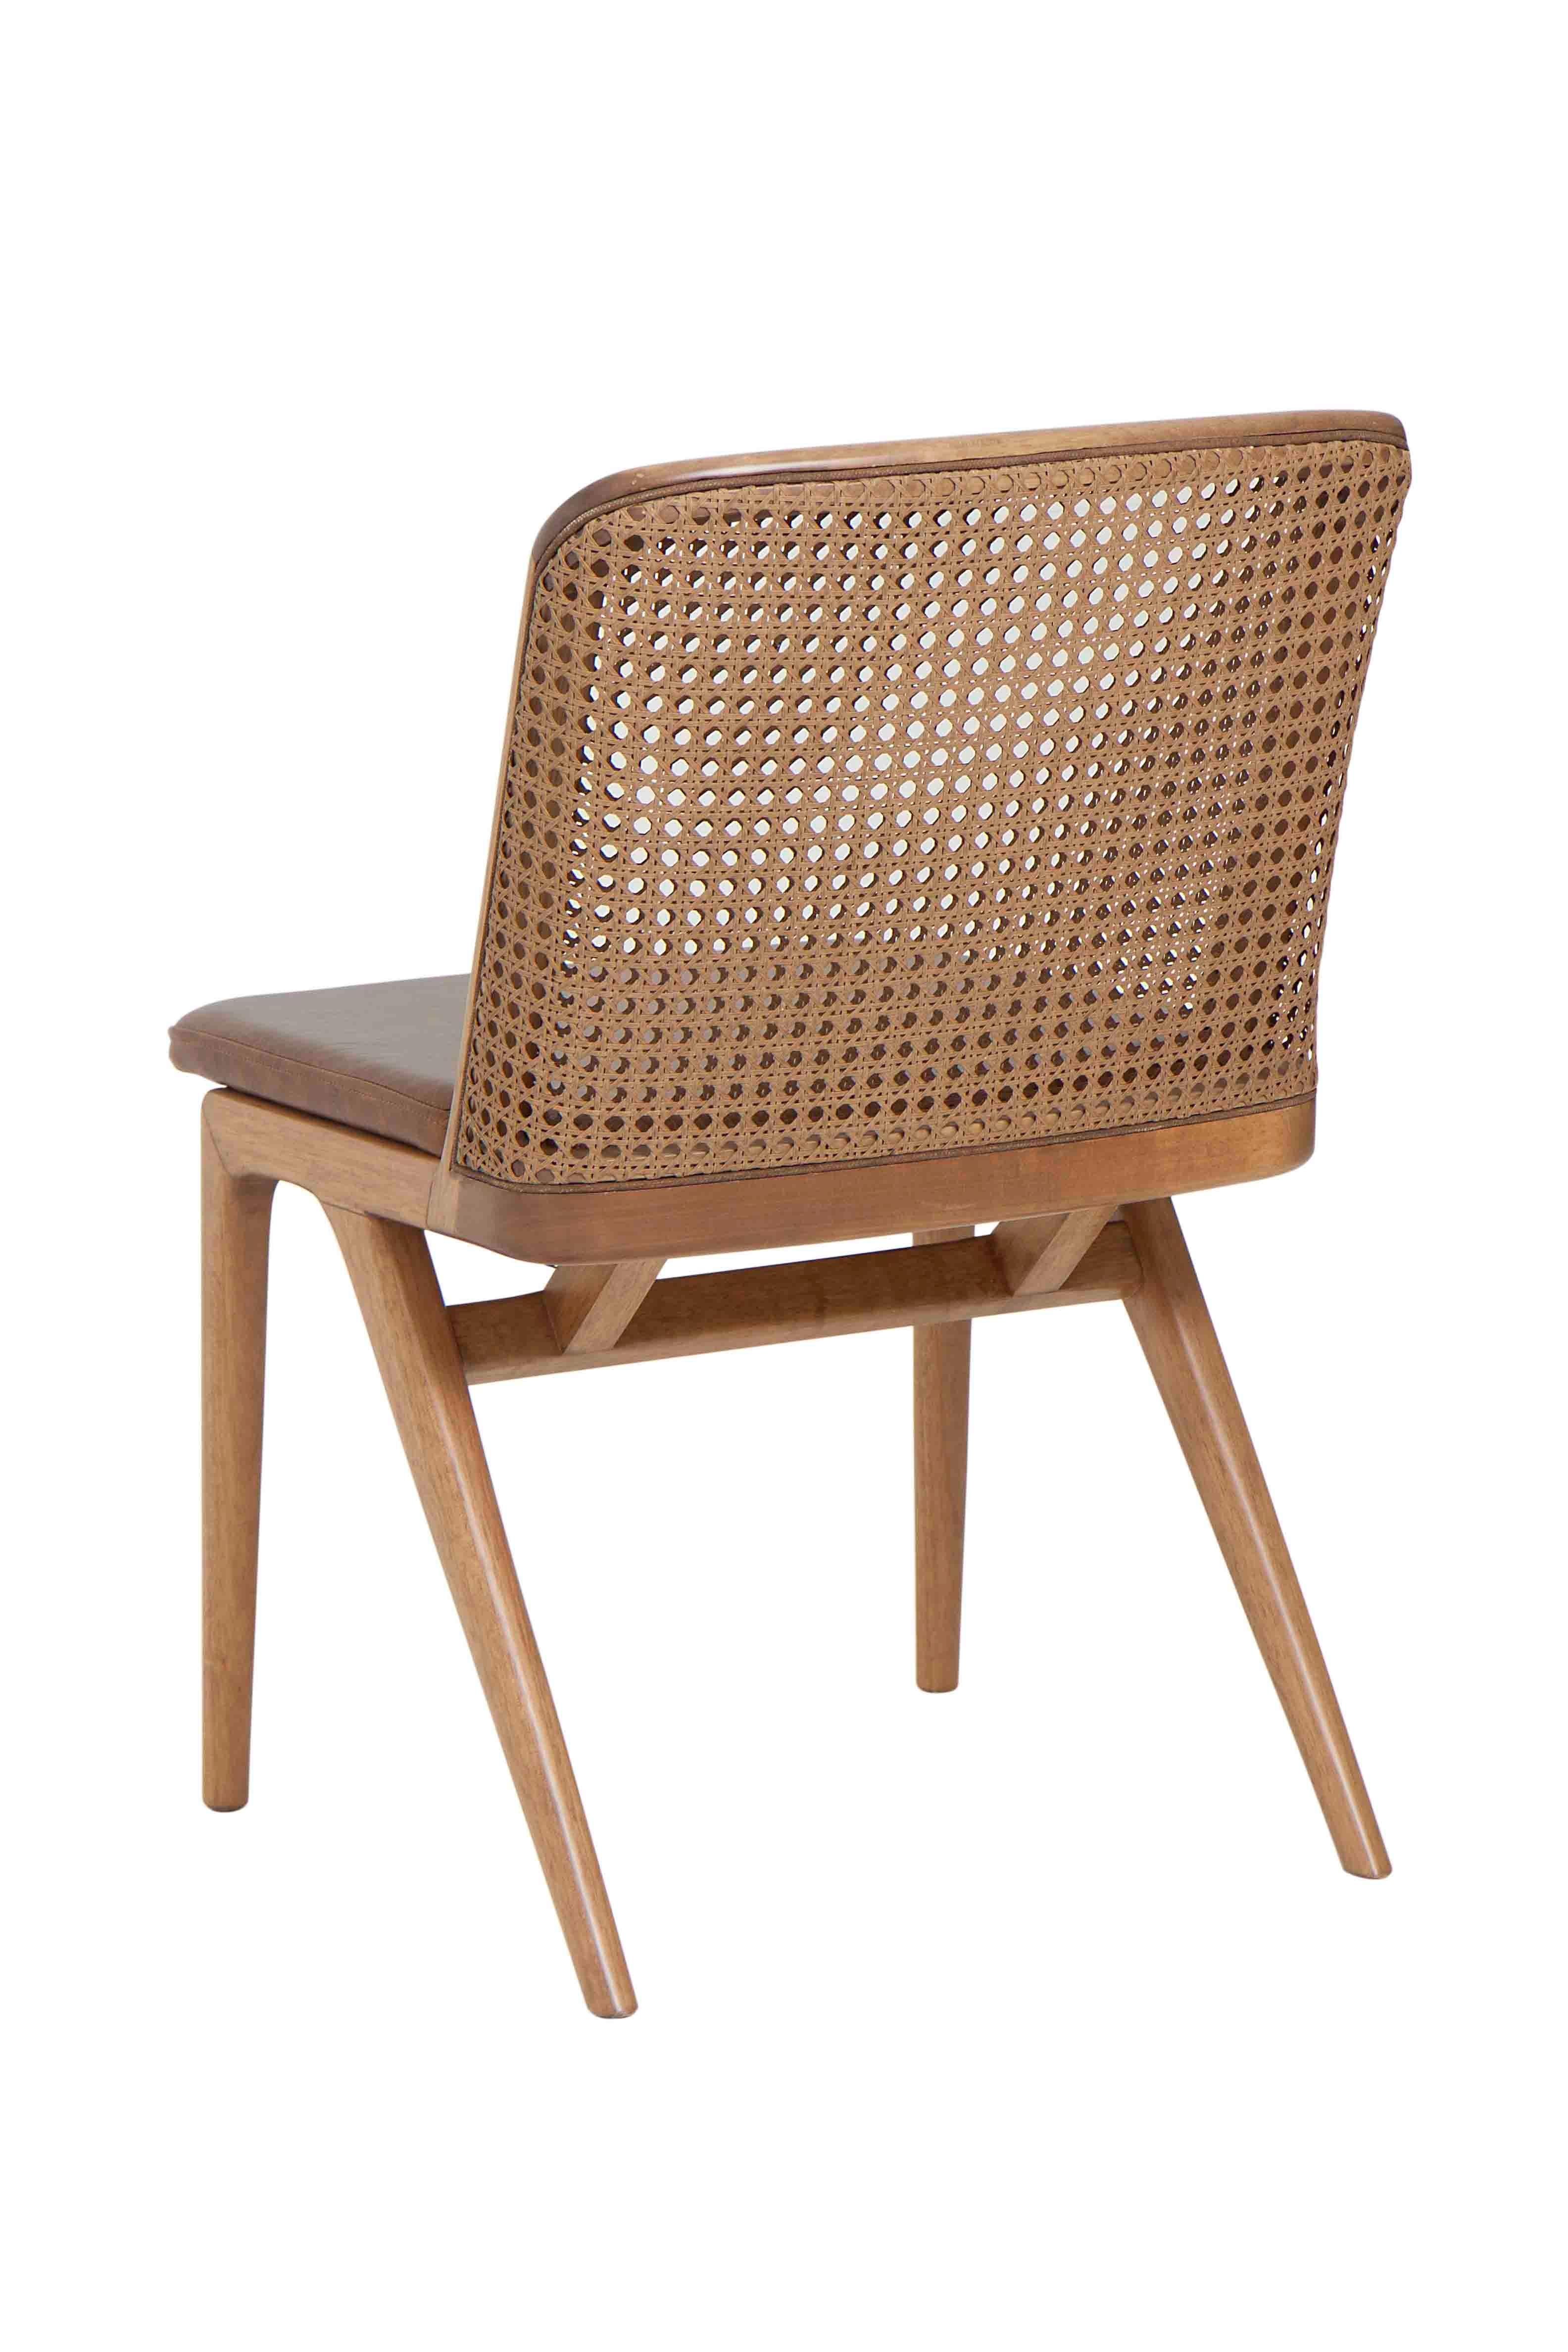 Our Estrela dining chair caramel colored with straw details will make your day more cheerful and comfortable.

Item Details:
Seat: Leather Caramel 502
Structure:Wood Catuaba
Backrest: Straw

NOTE: THE IMAGES ARE ILLUSTRATIVE, THE FINISHES ARE IN THE